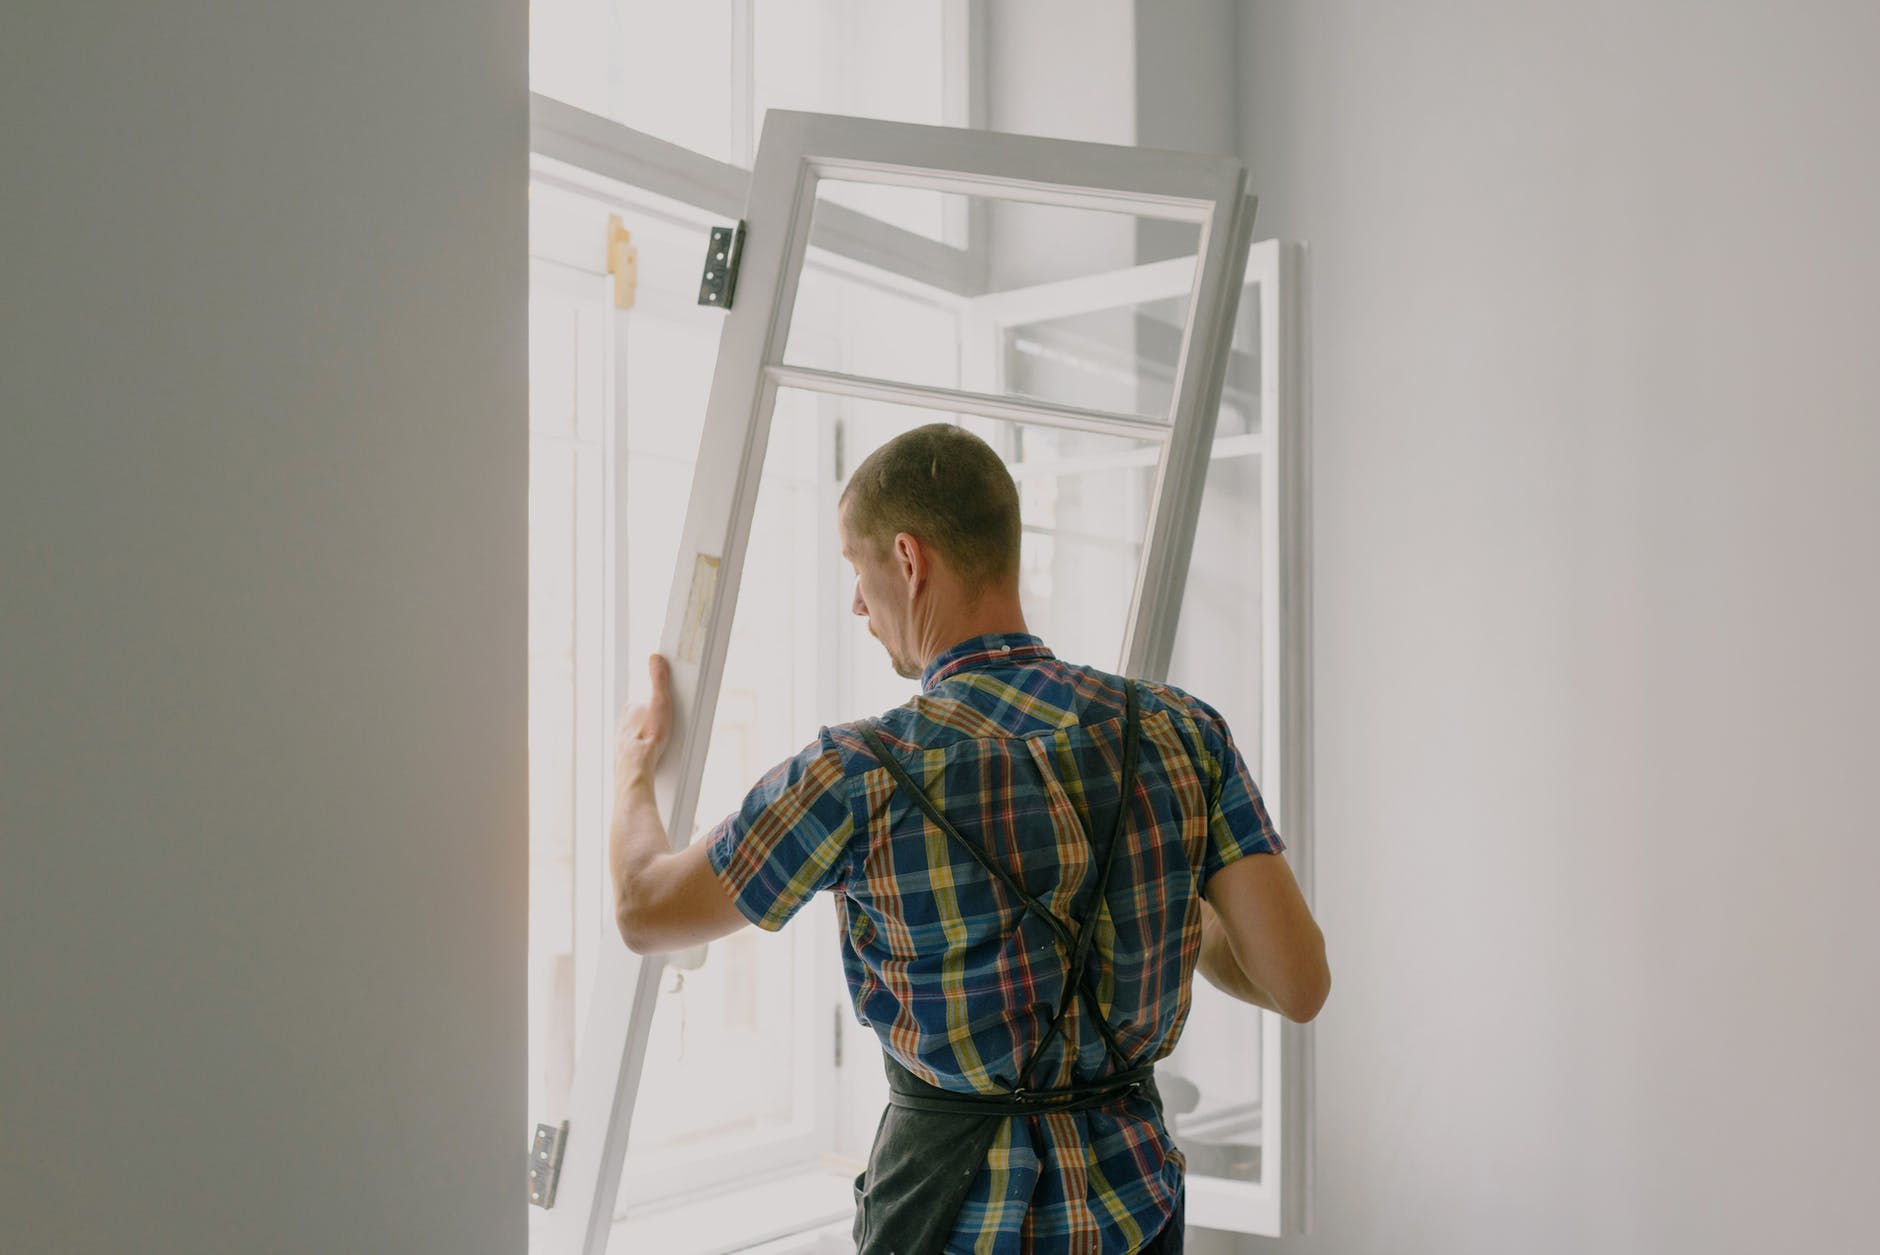 A man renovating a window frame in a room.